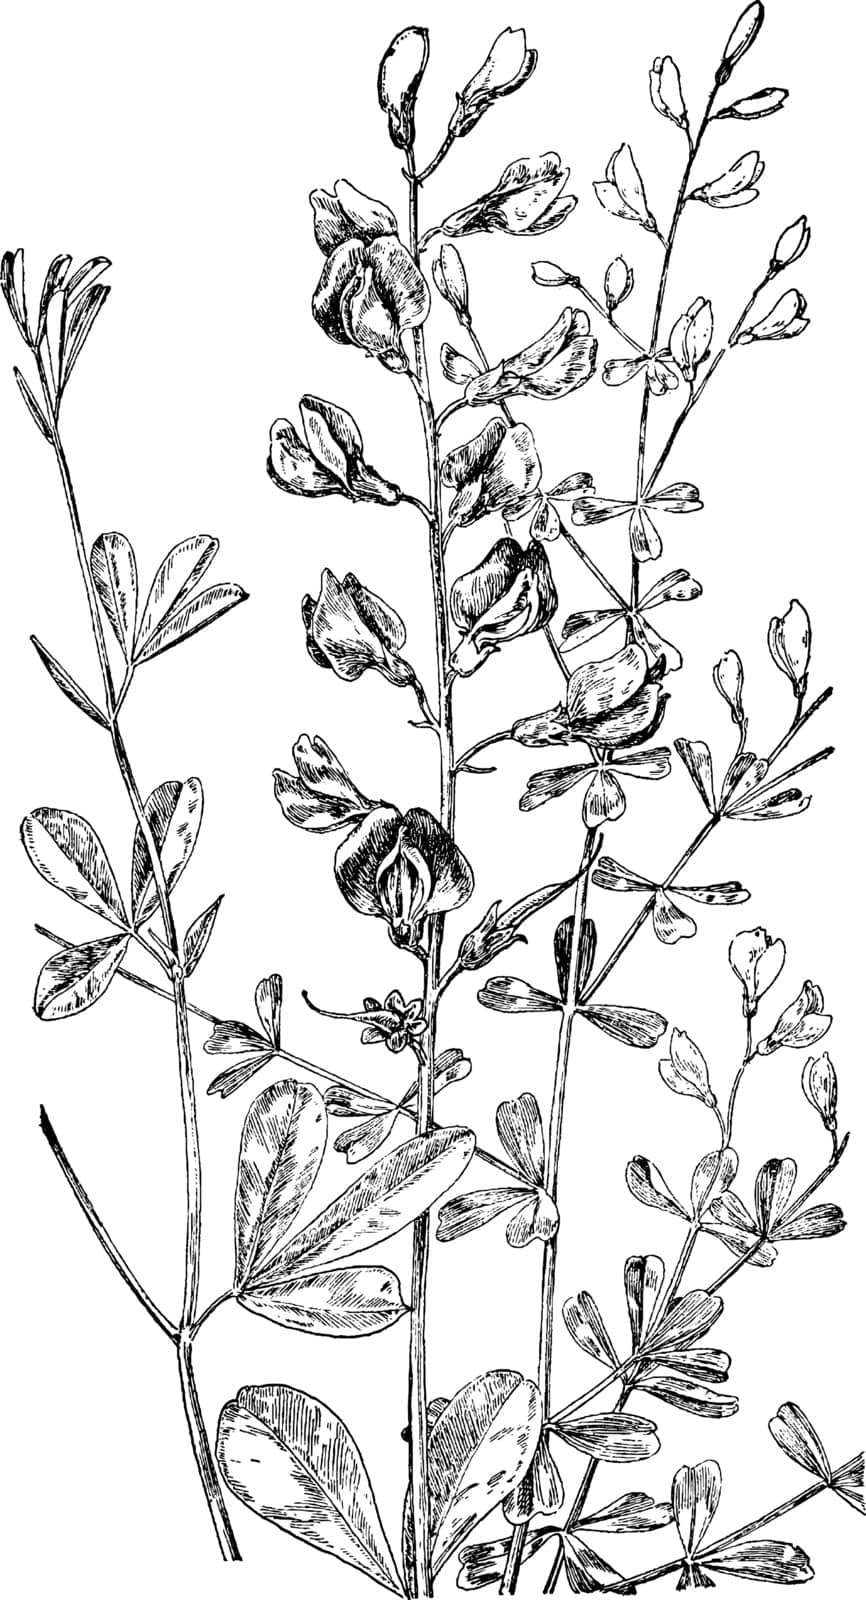 The picture, that's showing two plants, one is the Blue False Indigo and second is Wild Indigo. Those are flowering plant, vintage line drawing or engraving illustration.